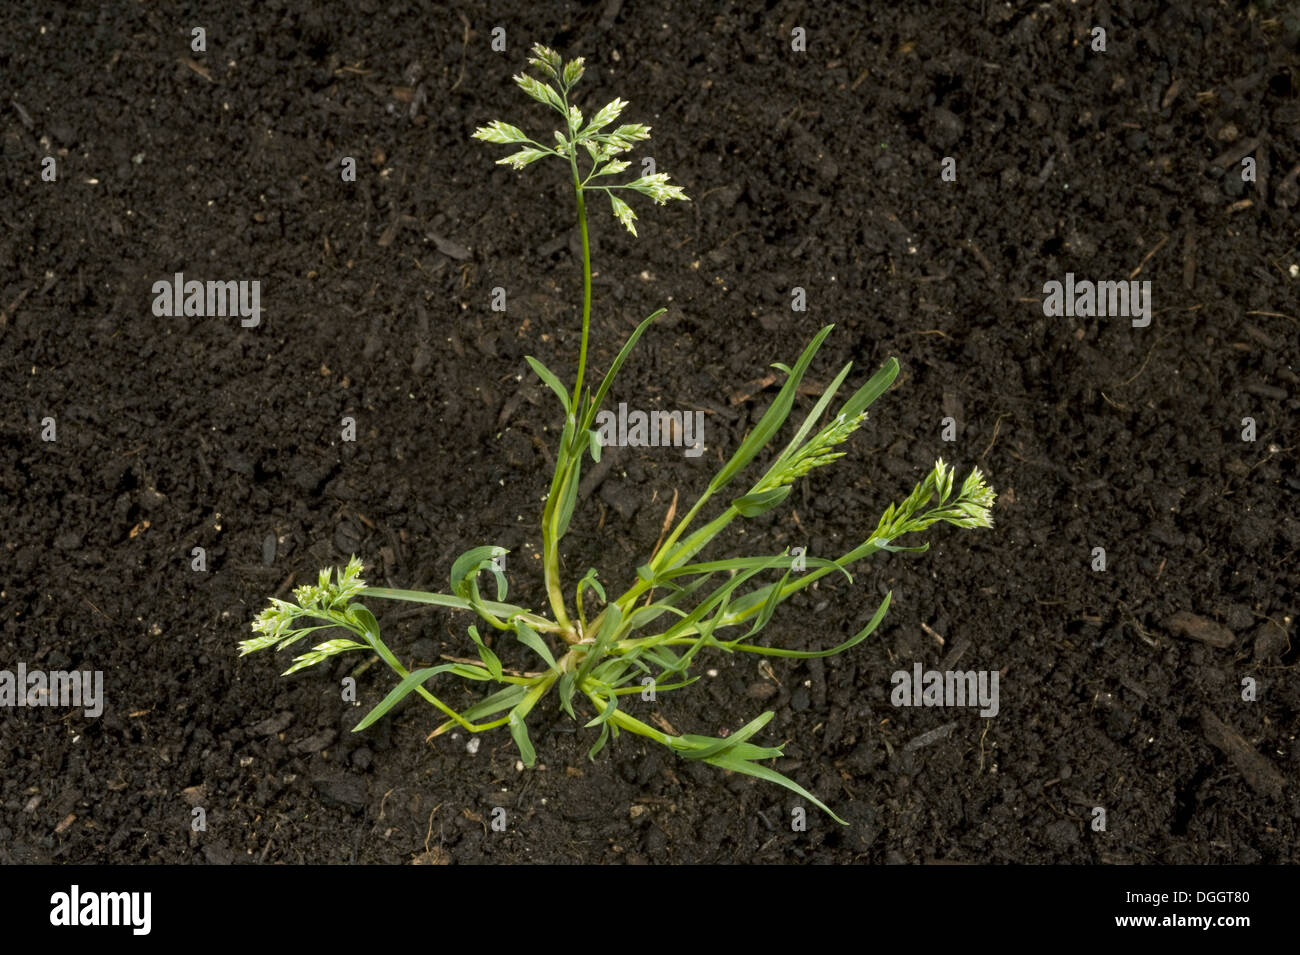 Annual meadow-grass, Poa annua, with tillers and flower on annual garden and agriculture weed Stock Photo